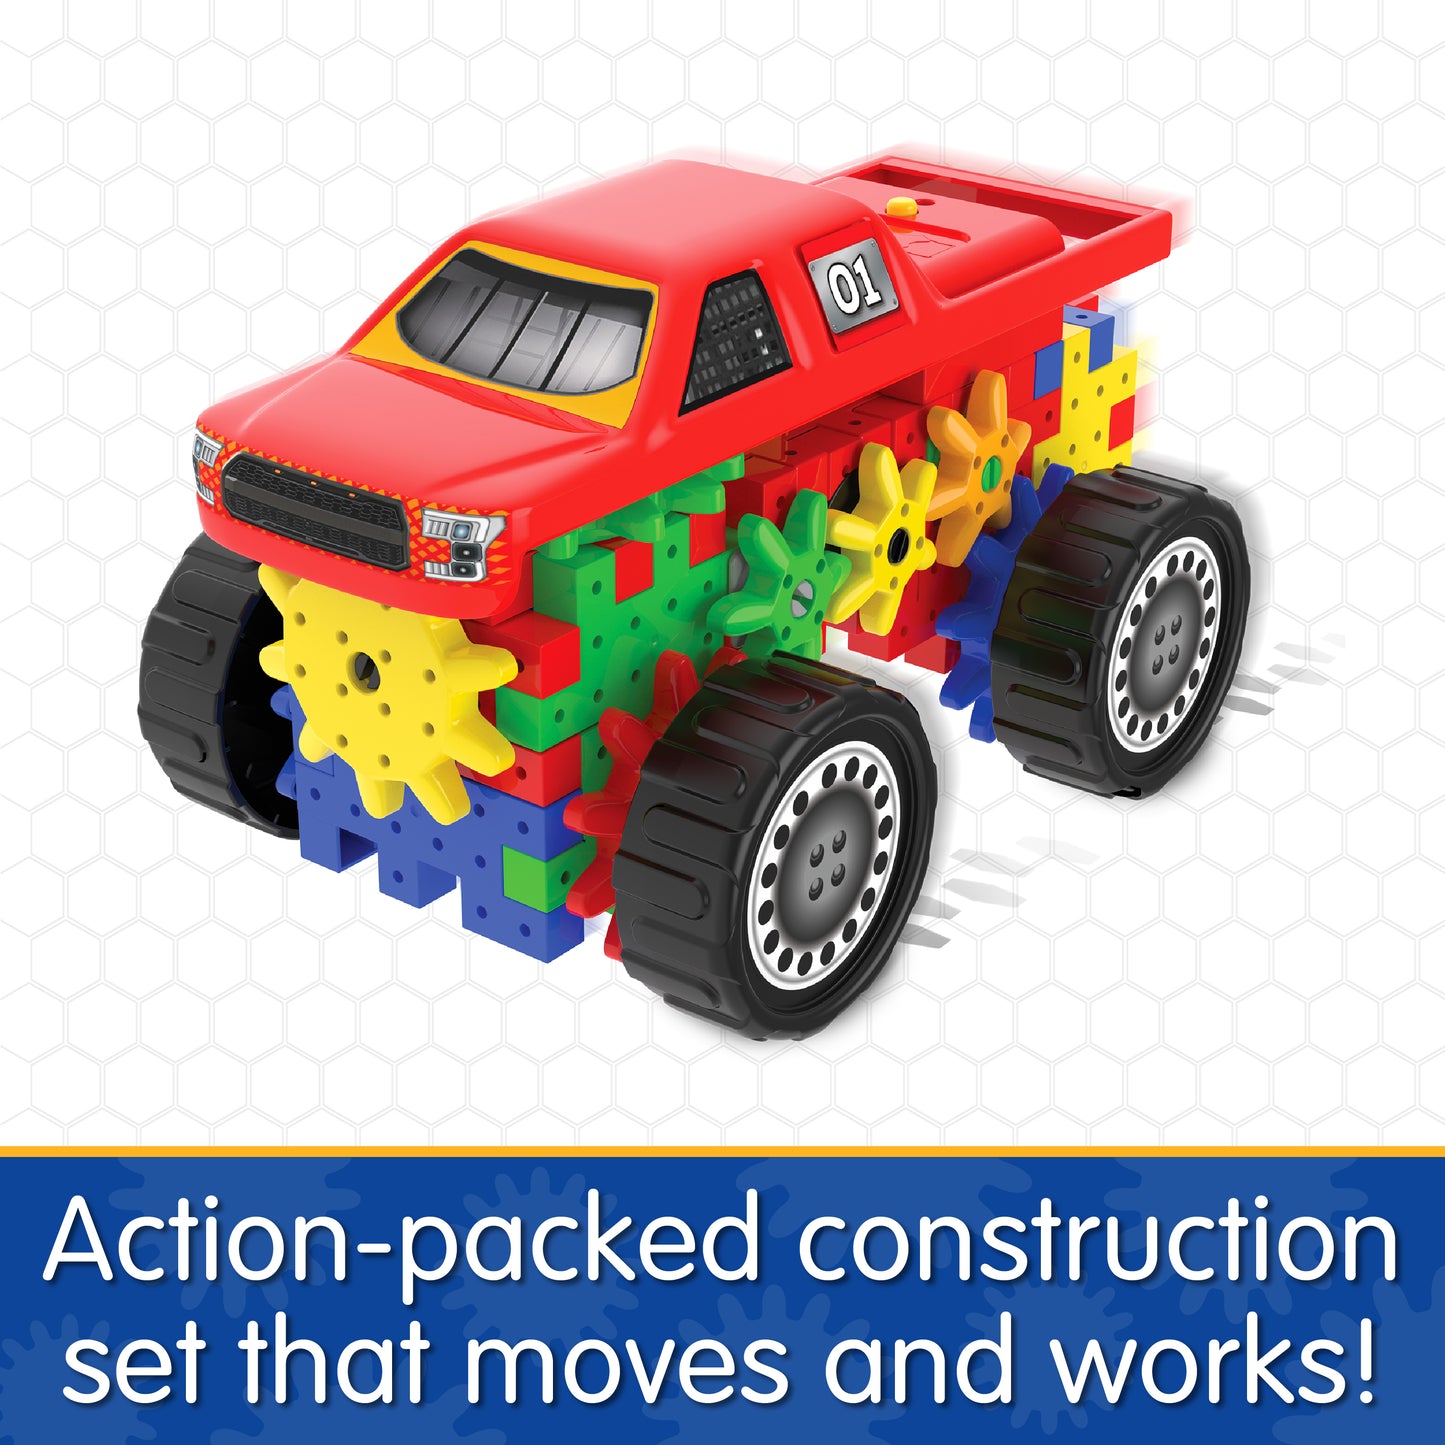 Infographic about Monster Truck 2.0 that says, "Action-packed construction set that moves and works!"